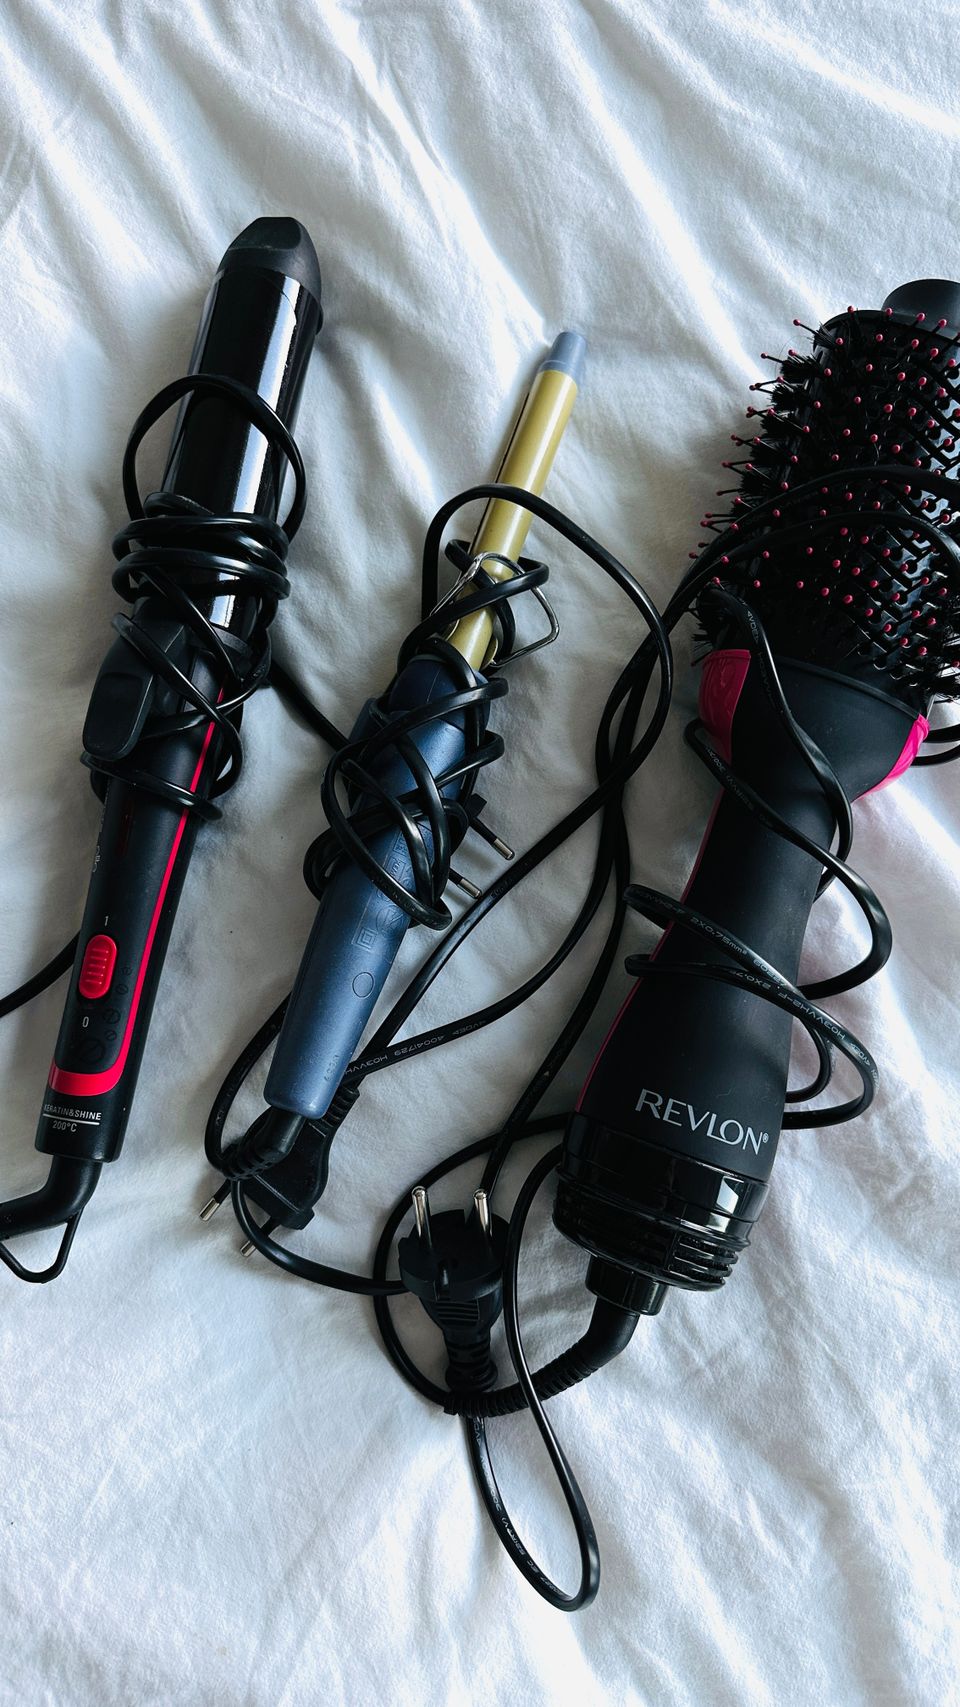 curling iron Roventa for creating large curls